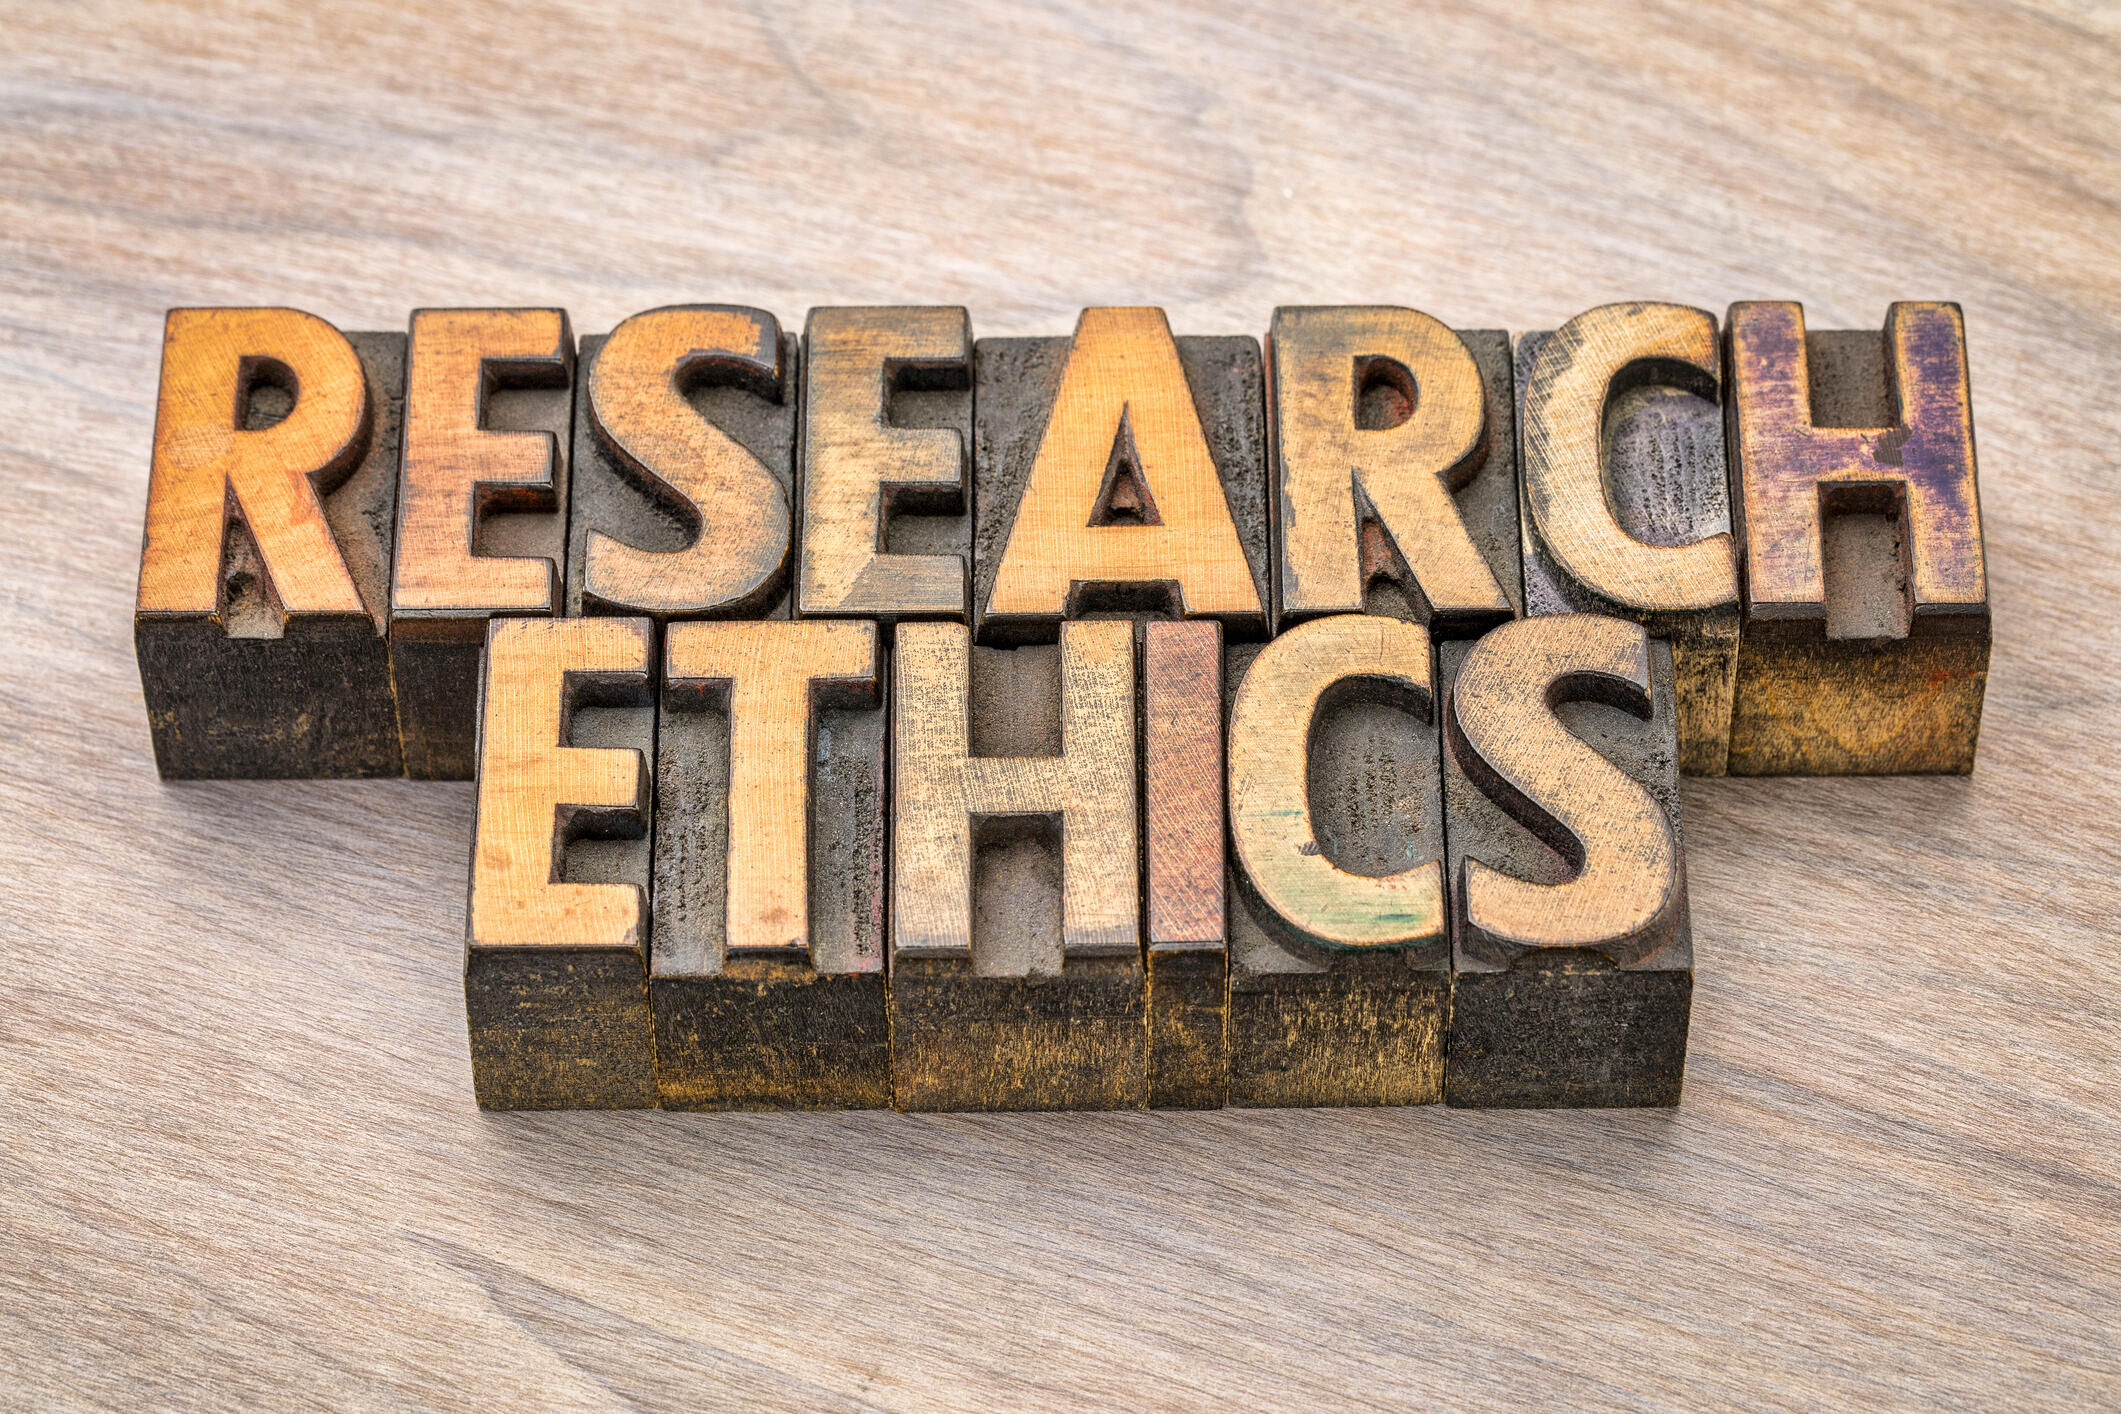 south central hampshire a research ethics committee